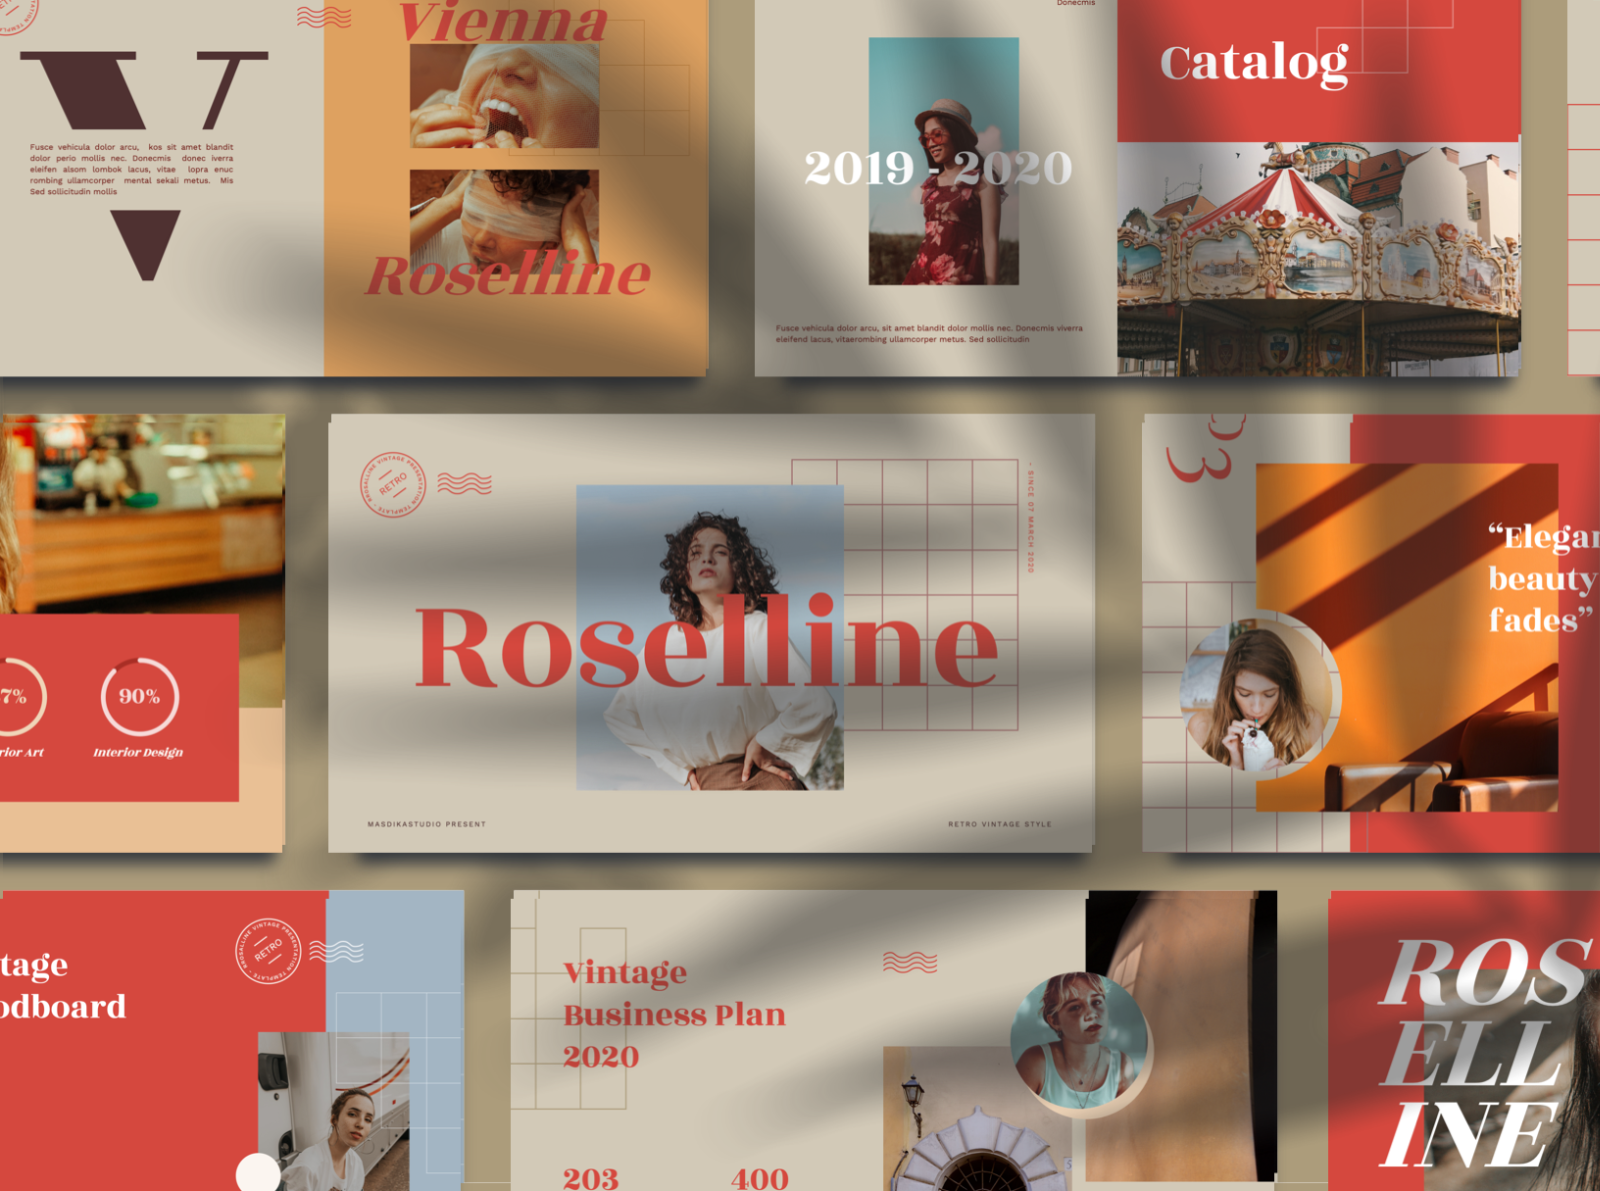 Roselline Vintage Retro Powerpoint Template by Mister Graphics on